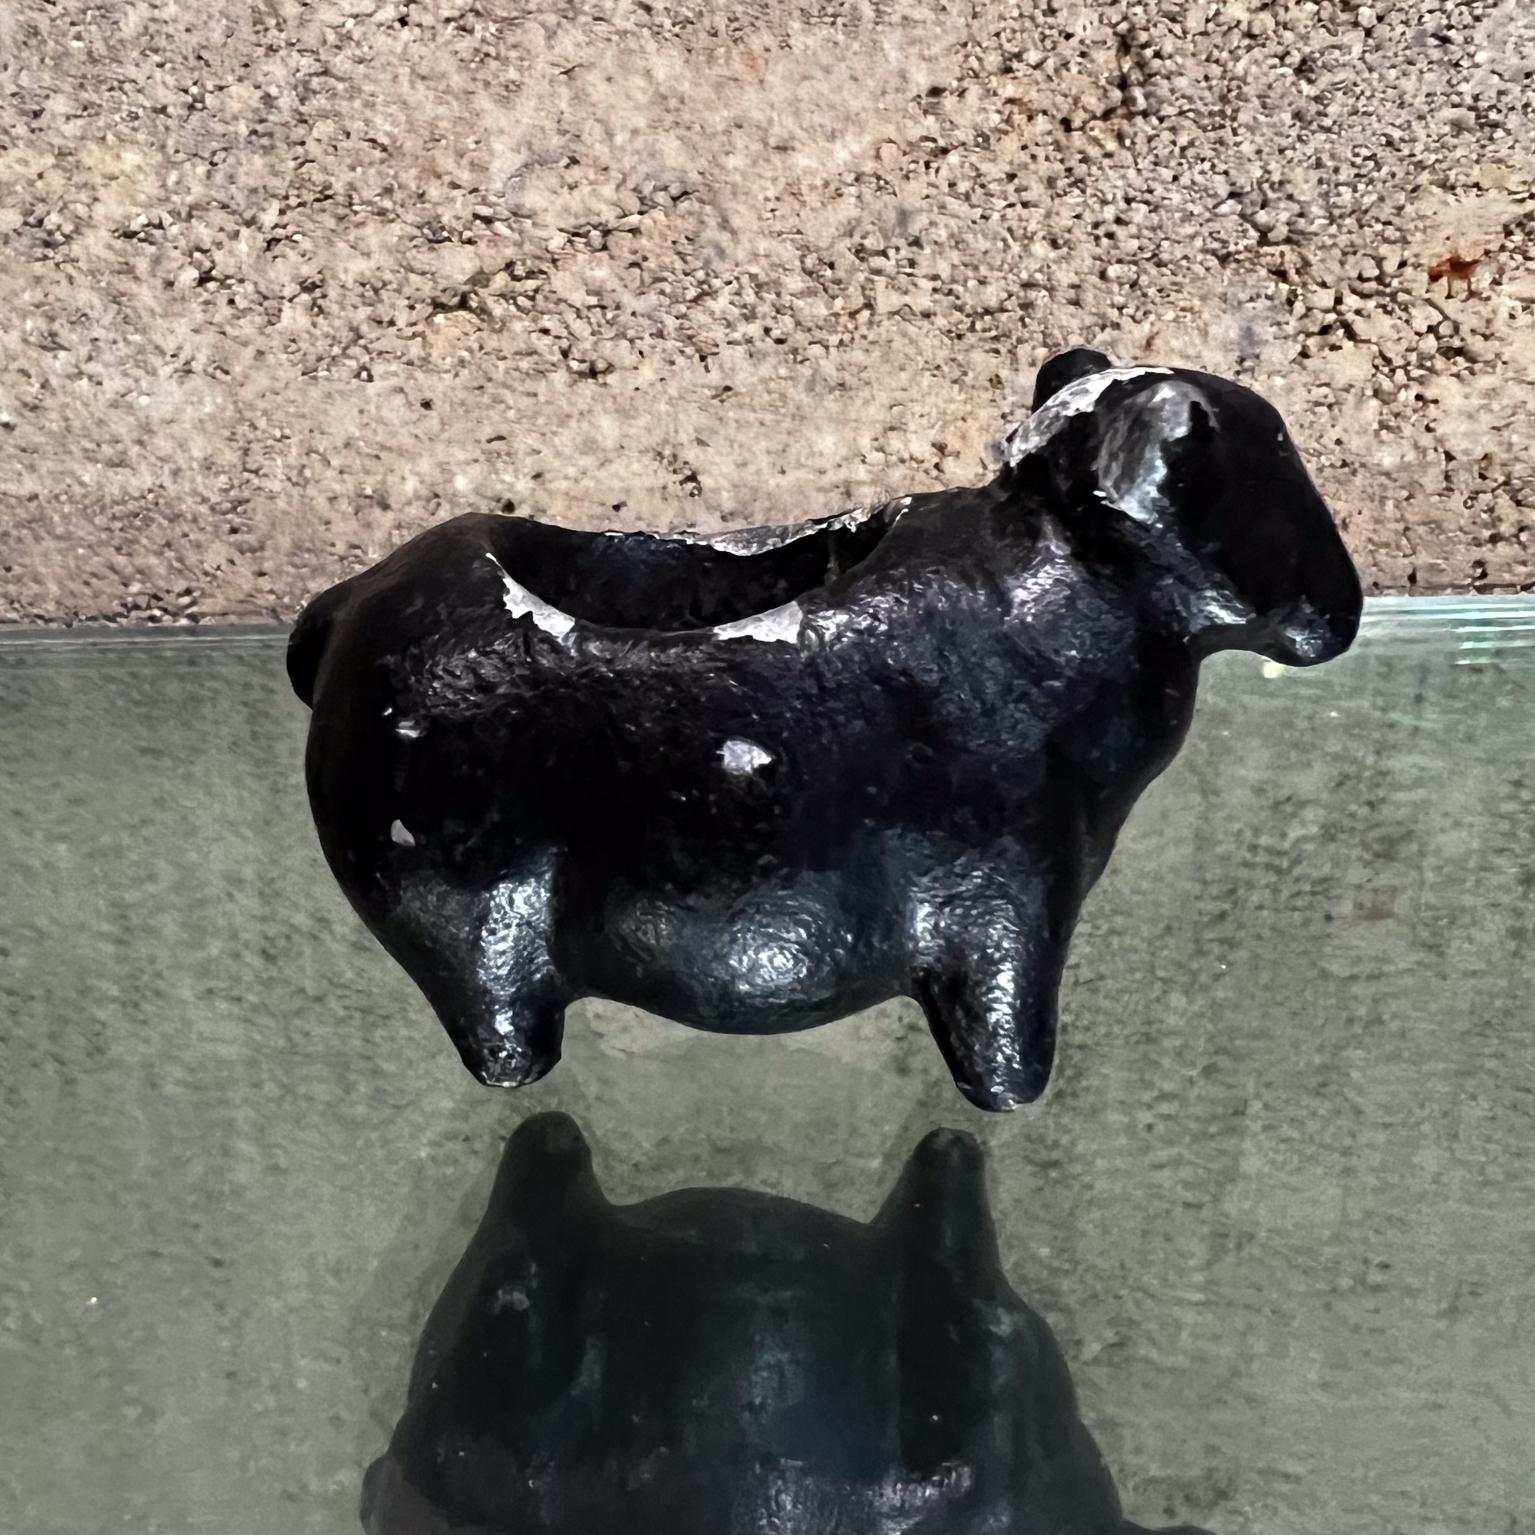 1960s Black Sheep Mini Planter Candle Holder signed 
Aluminum Painted Black signed art
3.25 d x 1.75 w x 2.25 h
Preowned unrestored vintage with wear and use. Minor losses.
Scuffs on the finish, wear around the edges.
Refer to images.